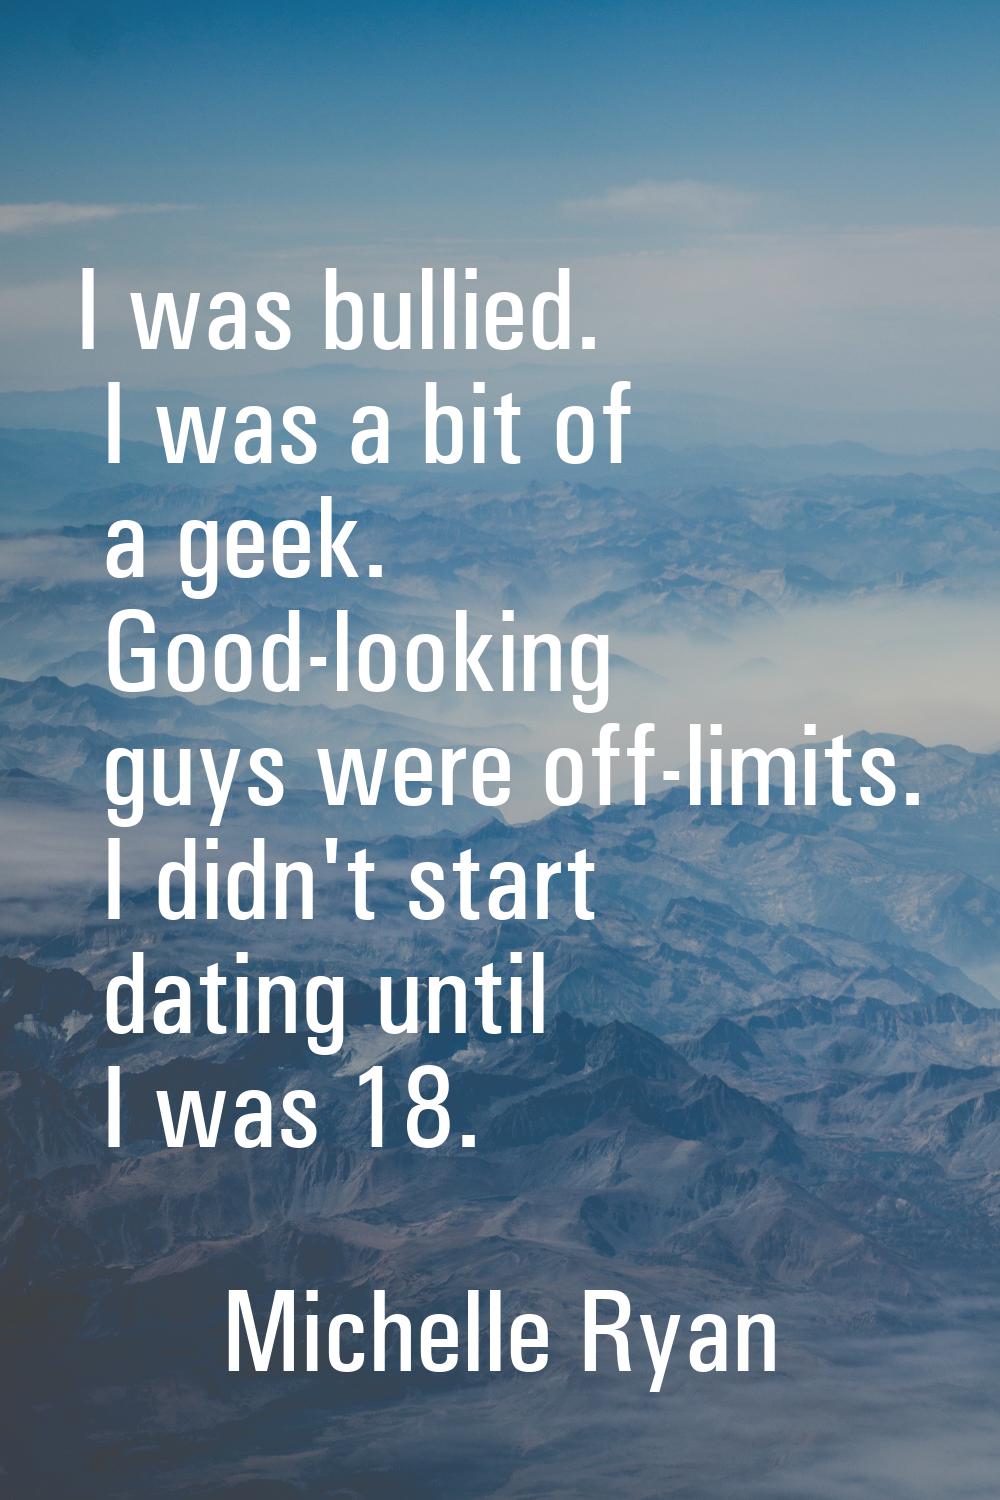 I was bullied. I was a bit of a geek. Good-looking guys were off-limits. I didn't start dating unti